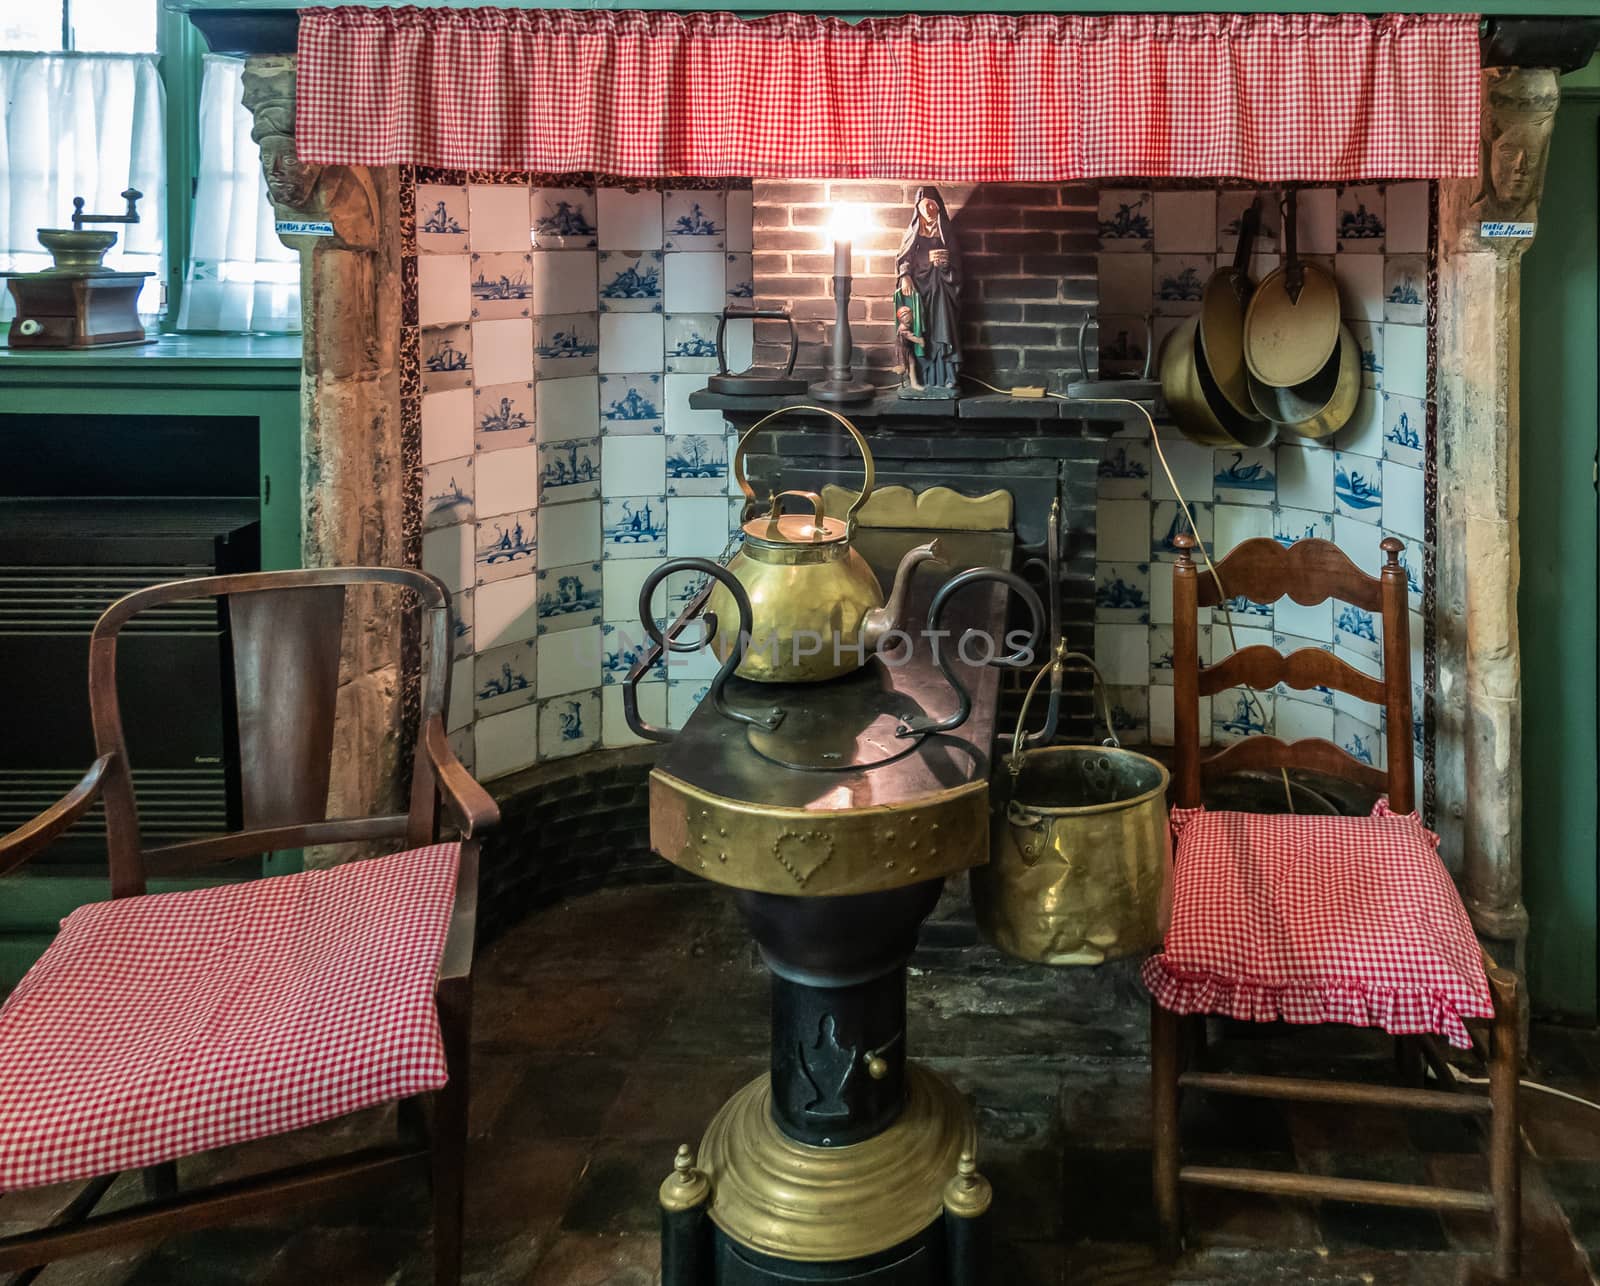 Bruges, Flanders, Belgium -  June 17, 2019: Kitchen of house in beguinage comes with hearth, long Leuvense Stove, chairs, coffee grinder, religious art, and pottery. Delfts Blue tiles.